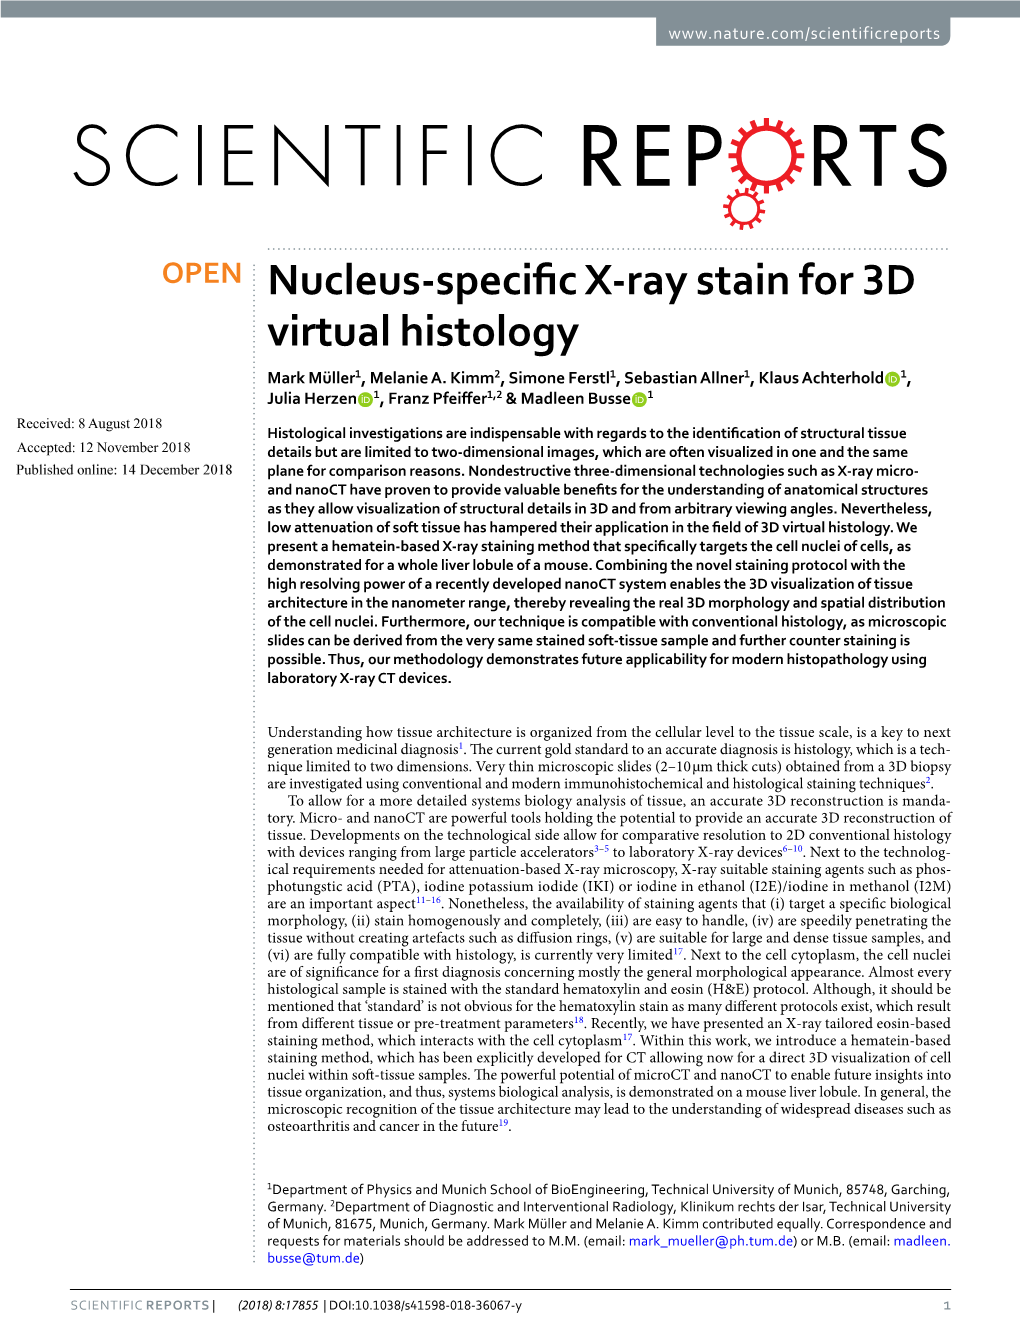 Nucleus-Specific X-Ray Stain for 3D Virtual Histology